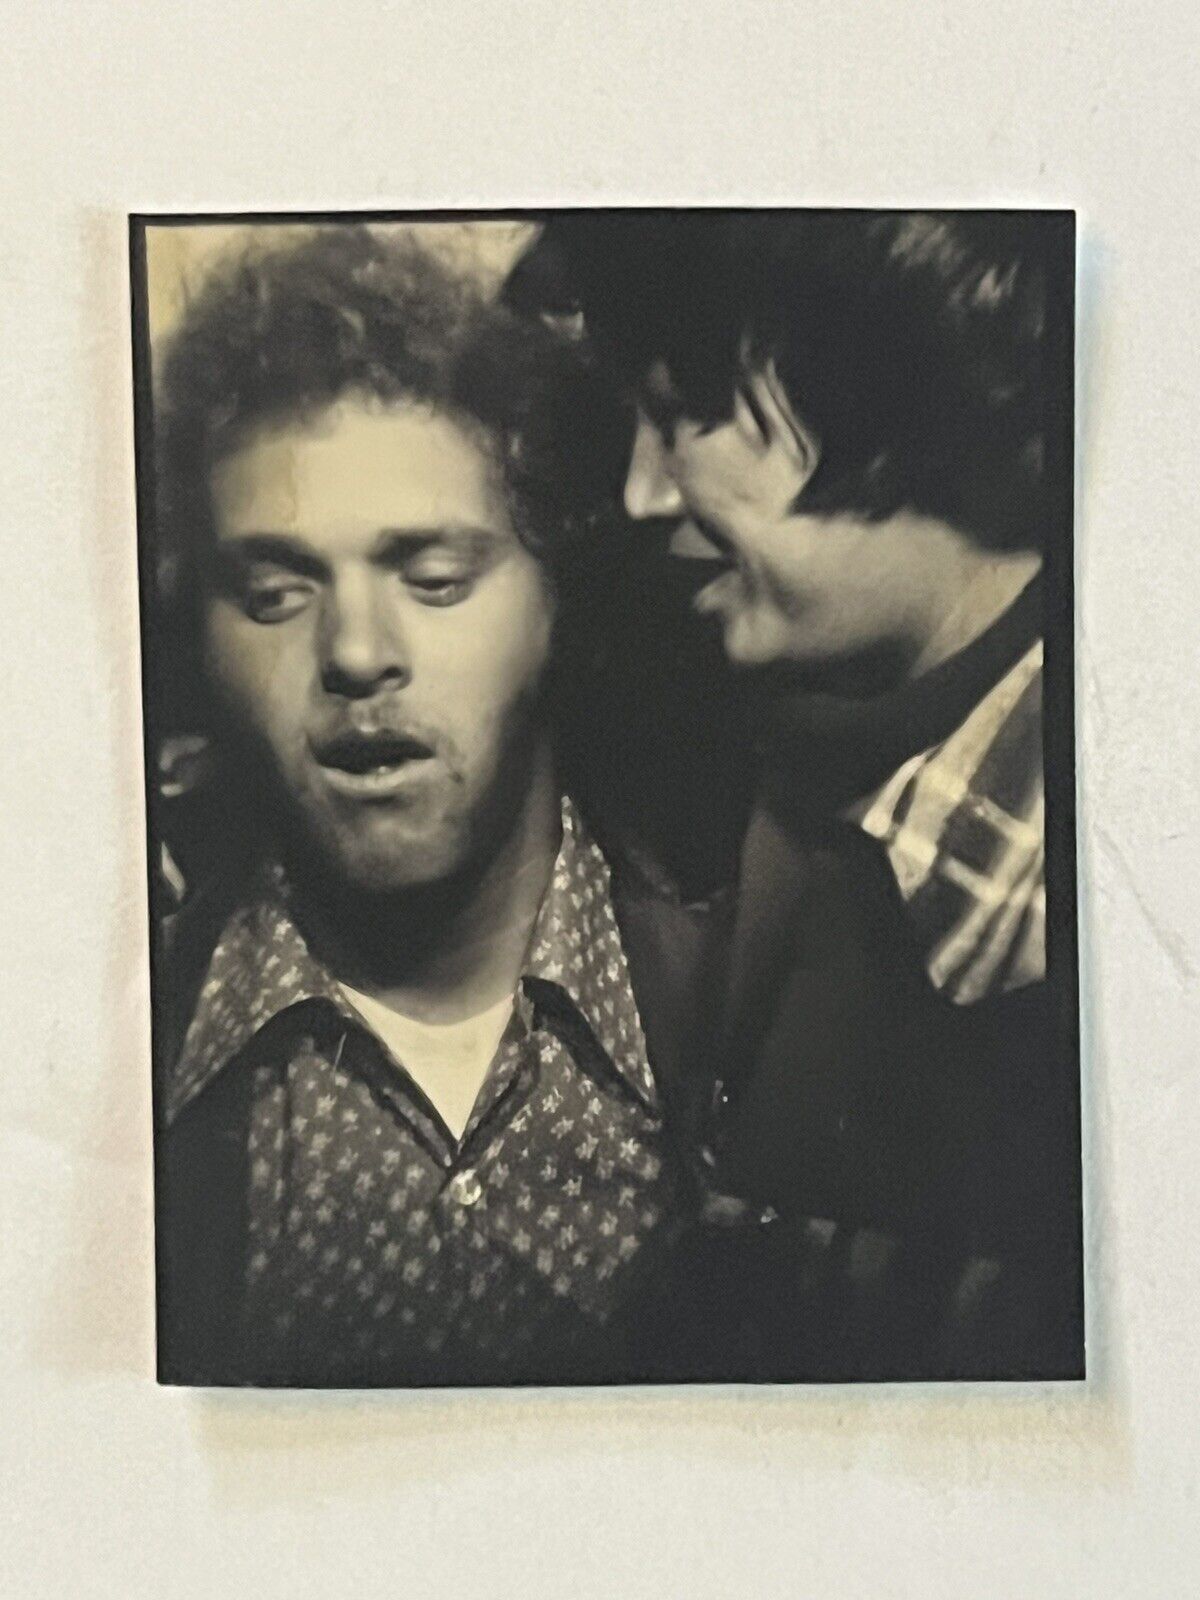 AMAZING 1970s STONED/WASTED DUDE/GIRL LOOKING OVER in PHOTOBOOTH DAZED &CONFUSED